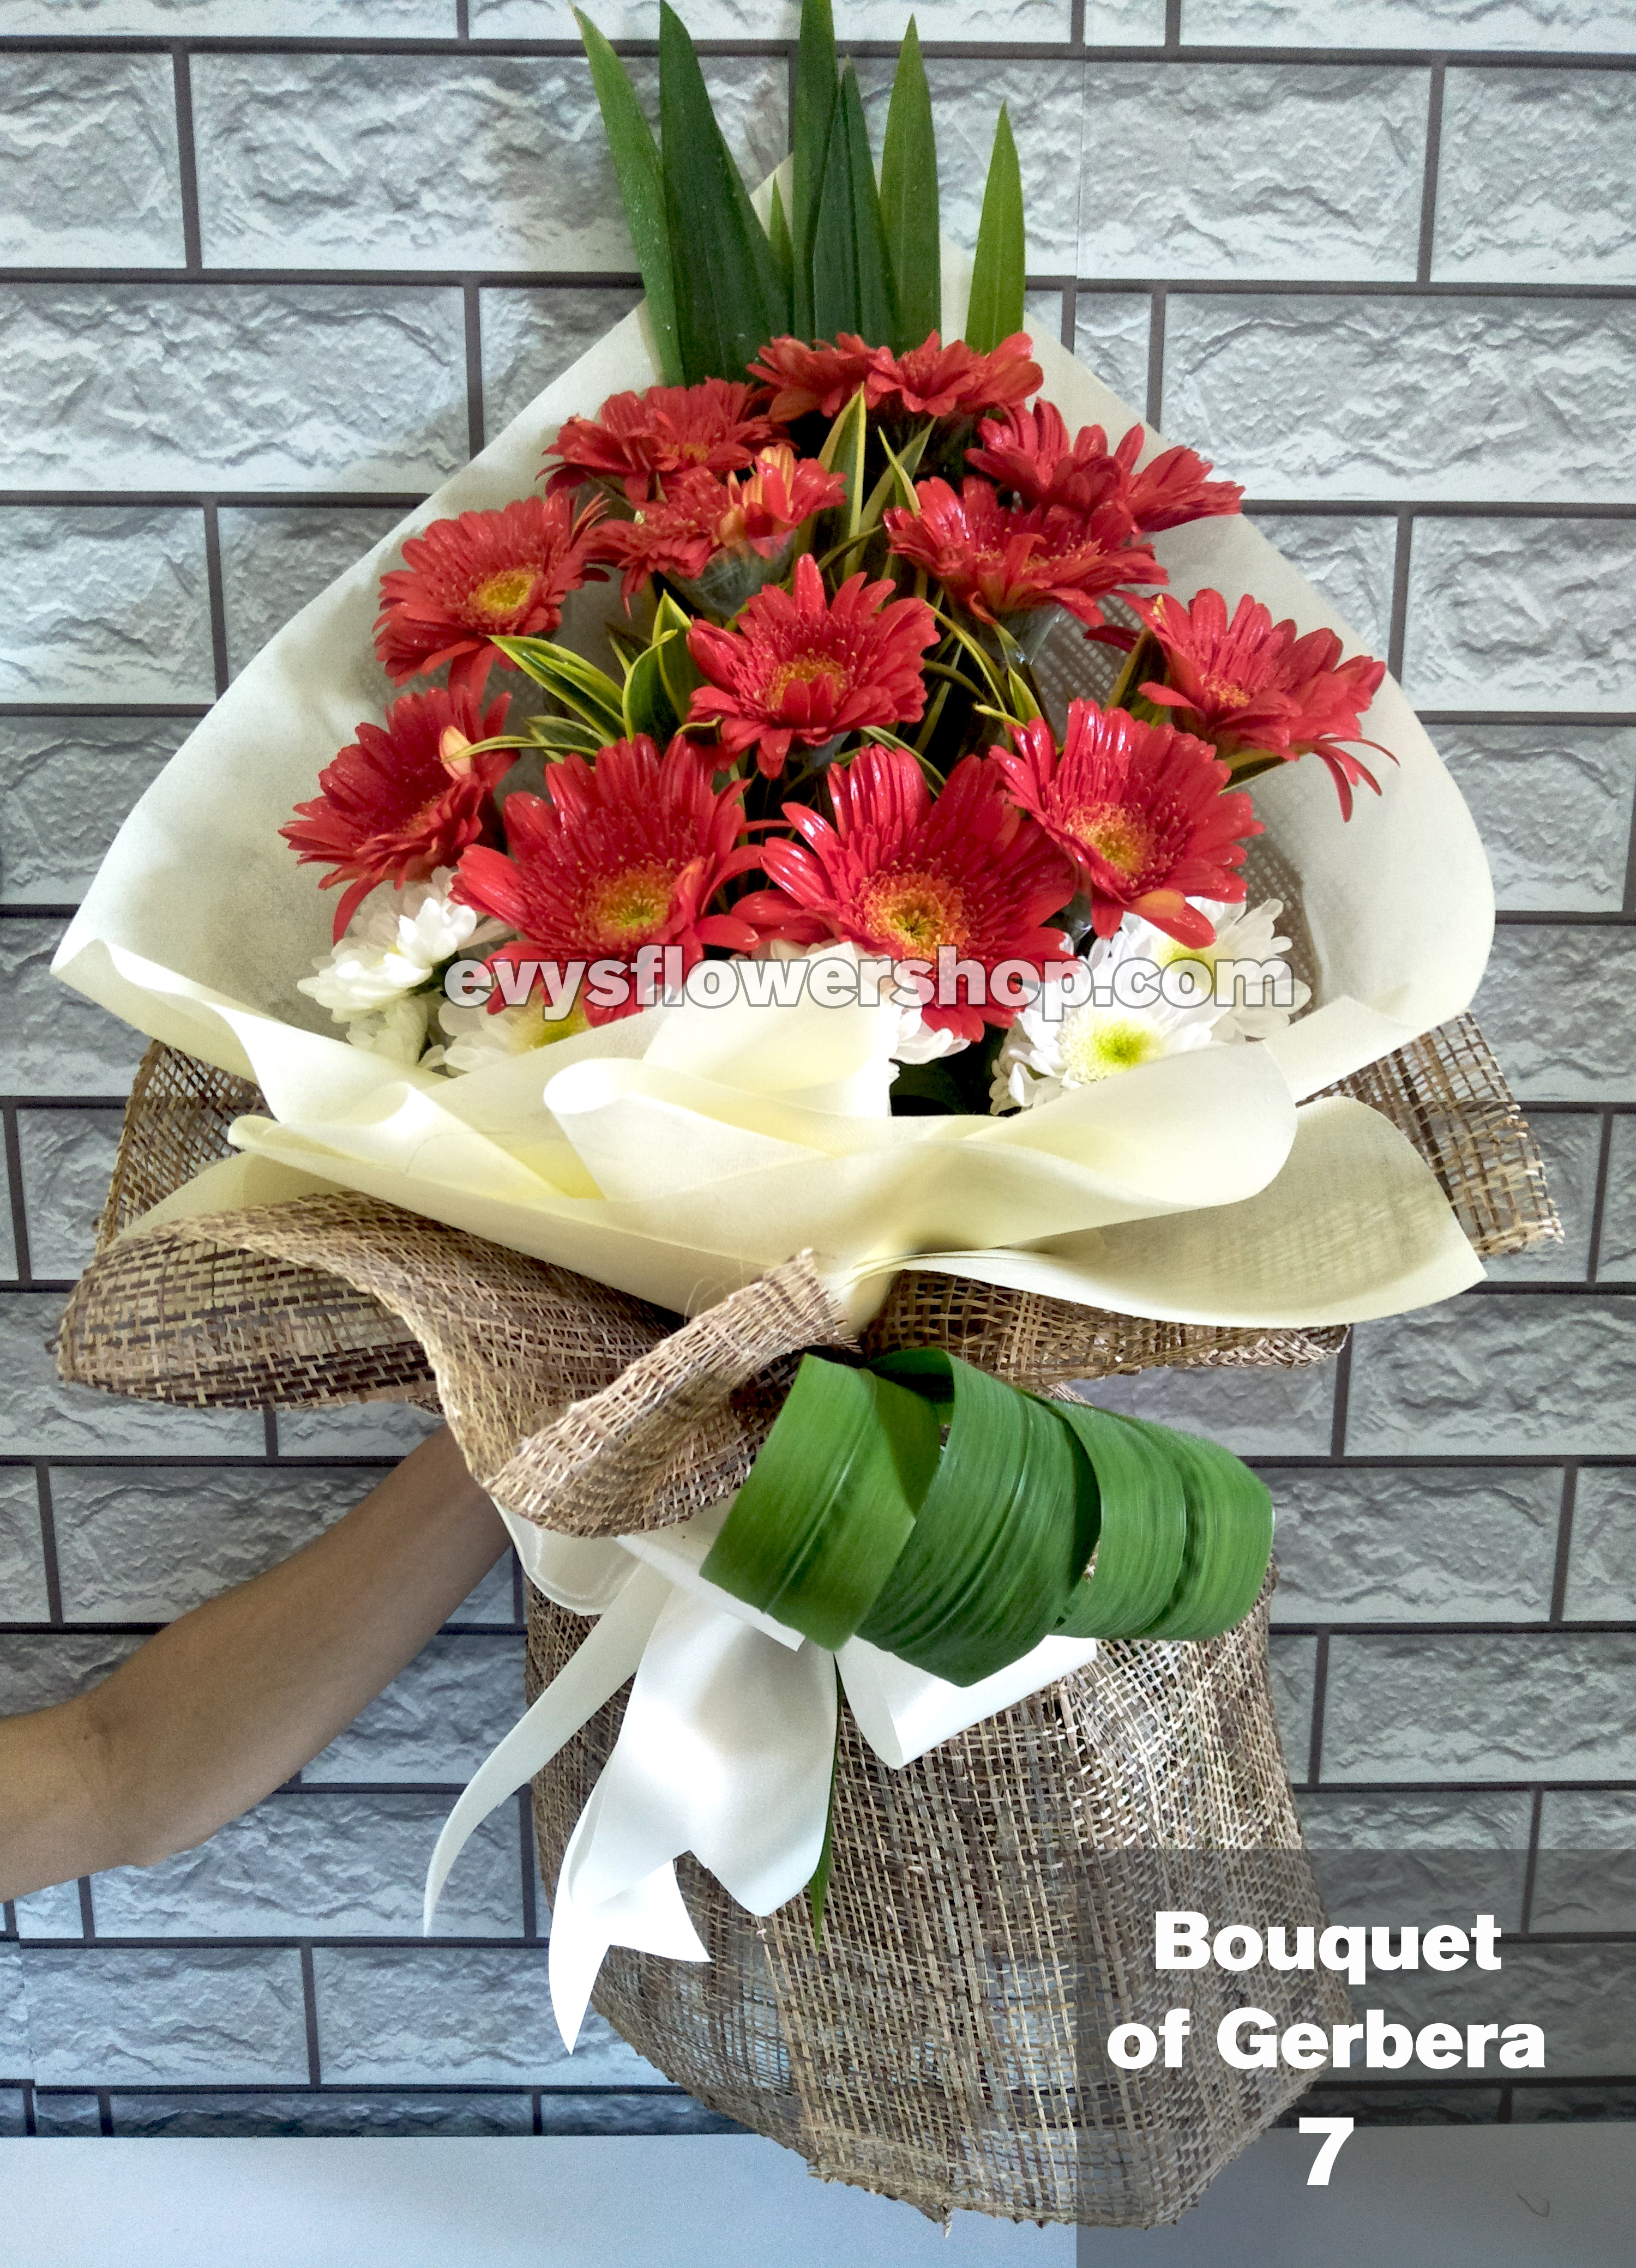 bouquet of gerbera 7 - EVYS FLOWER SHOP FREE DELIVERY